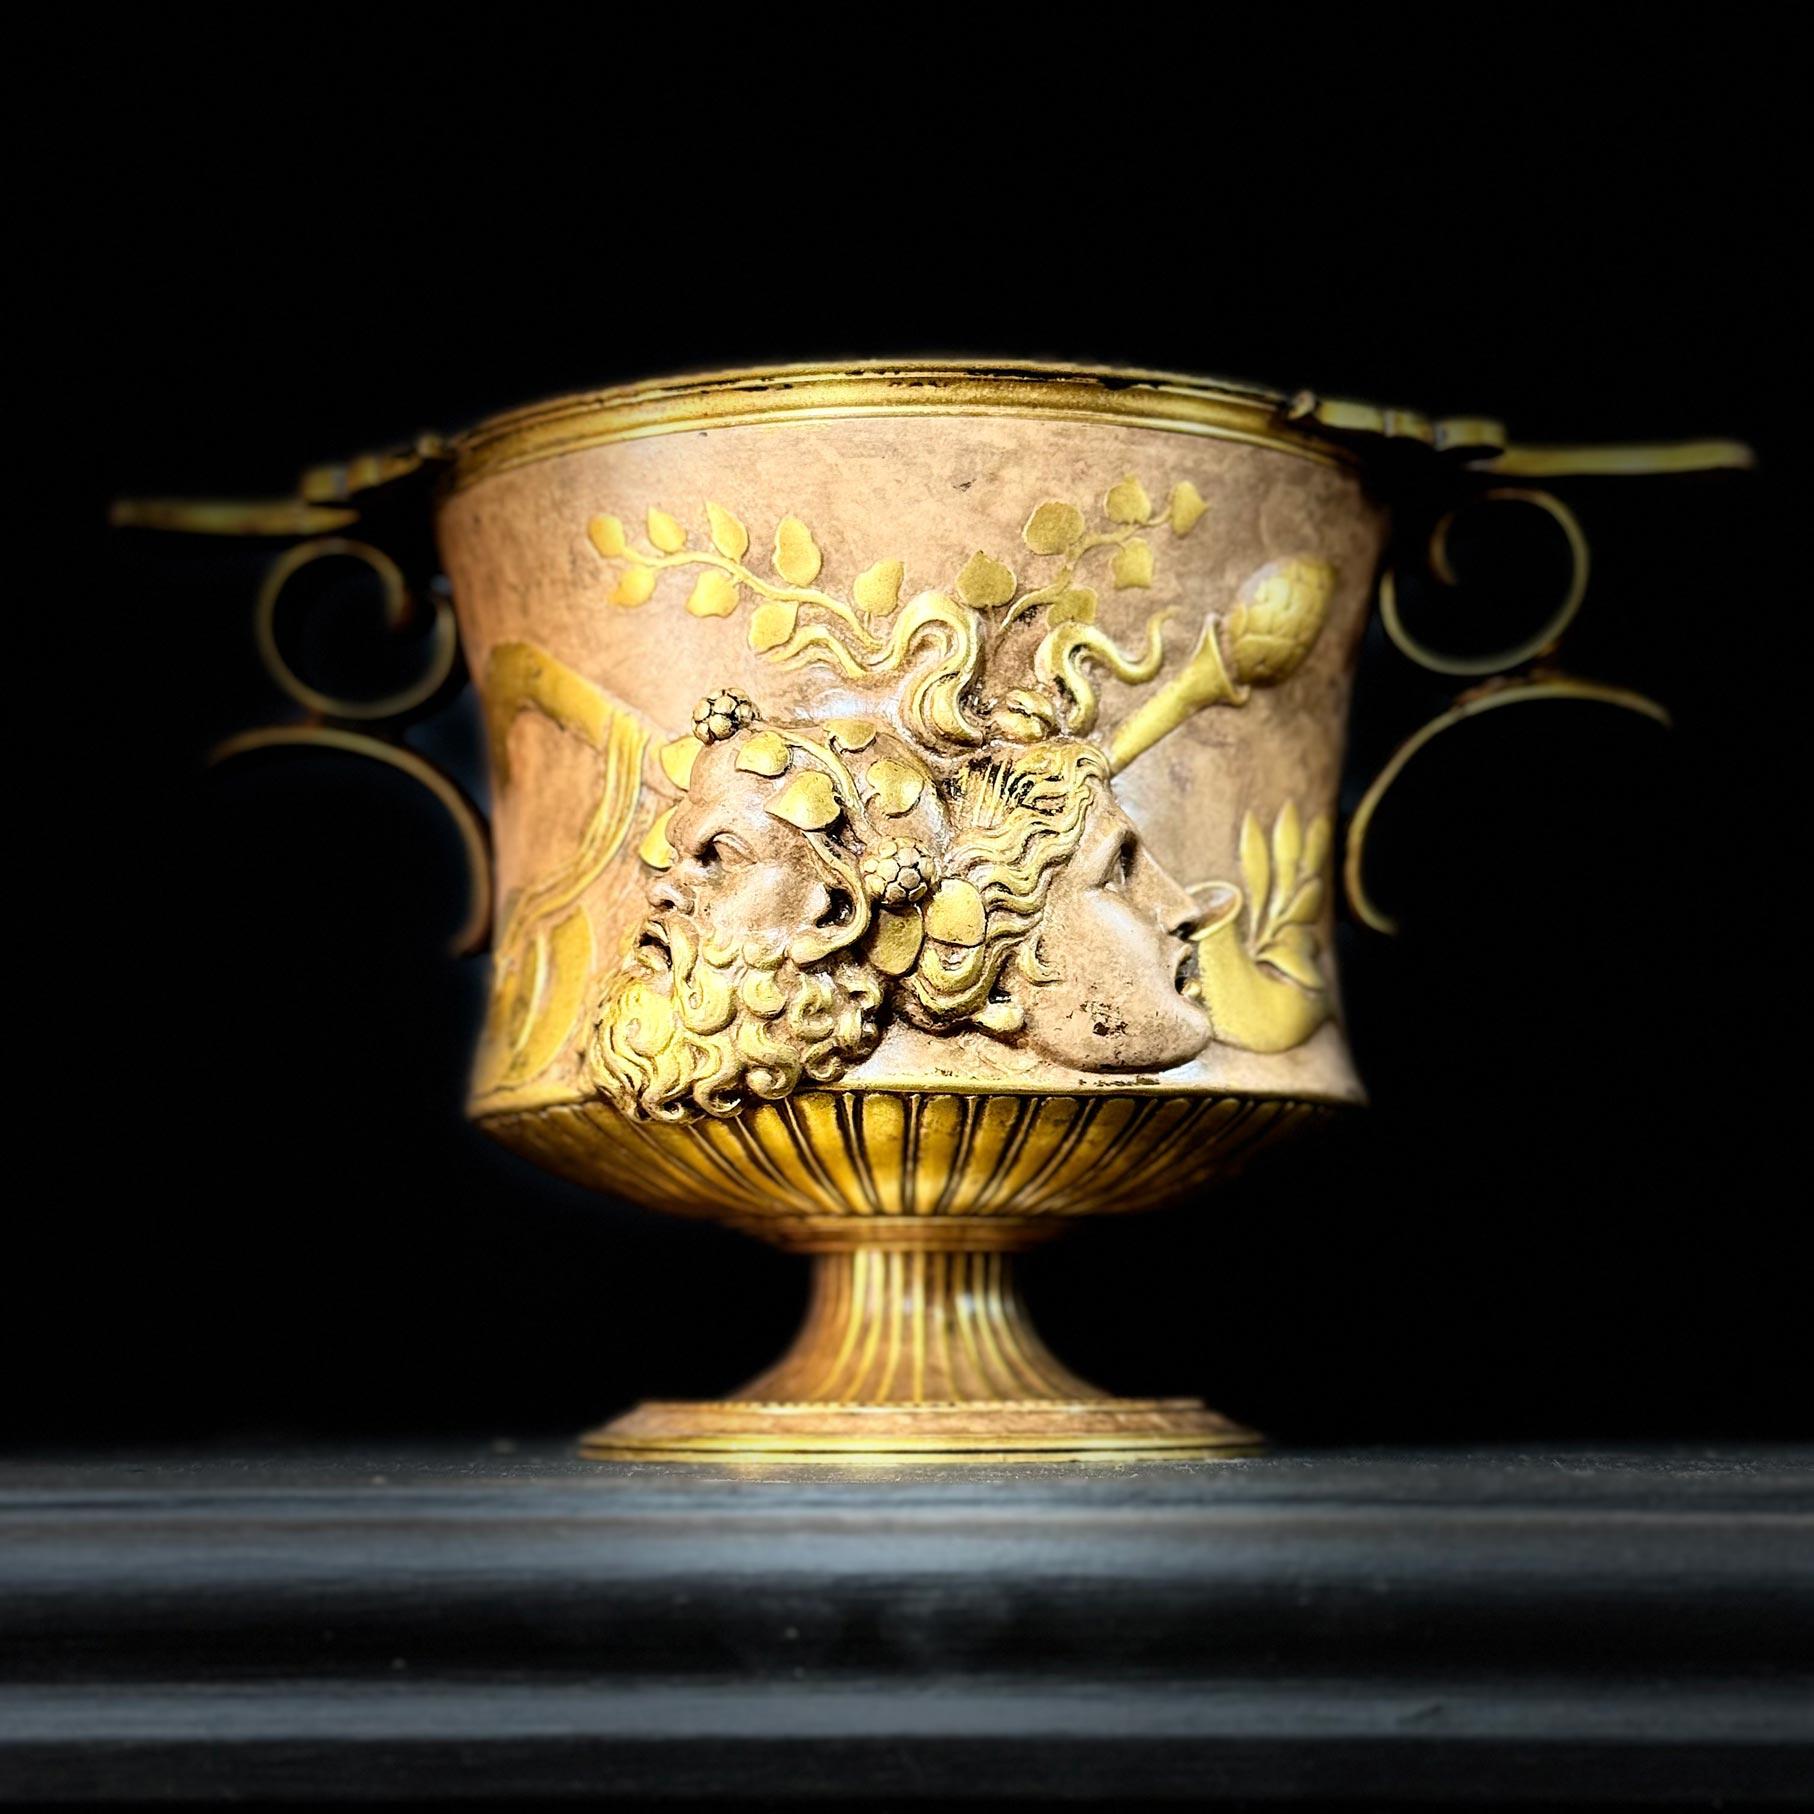 Glorious 19th century gilt bronze low handled urn modelled after the original Borghese vase by Giovanni Zoffoli  (c1785-1845) cast by Barbedienne in the third quarter of the 19th century.  14.5 cm Tall and 24.5 cm Across.  

The work is